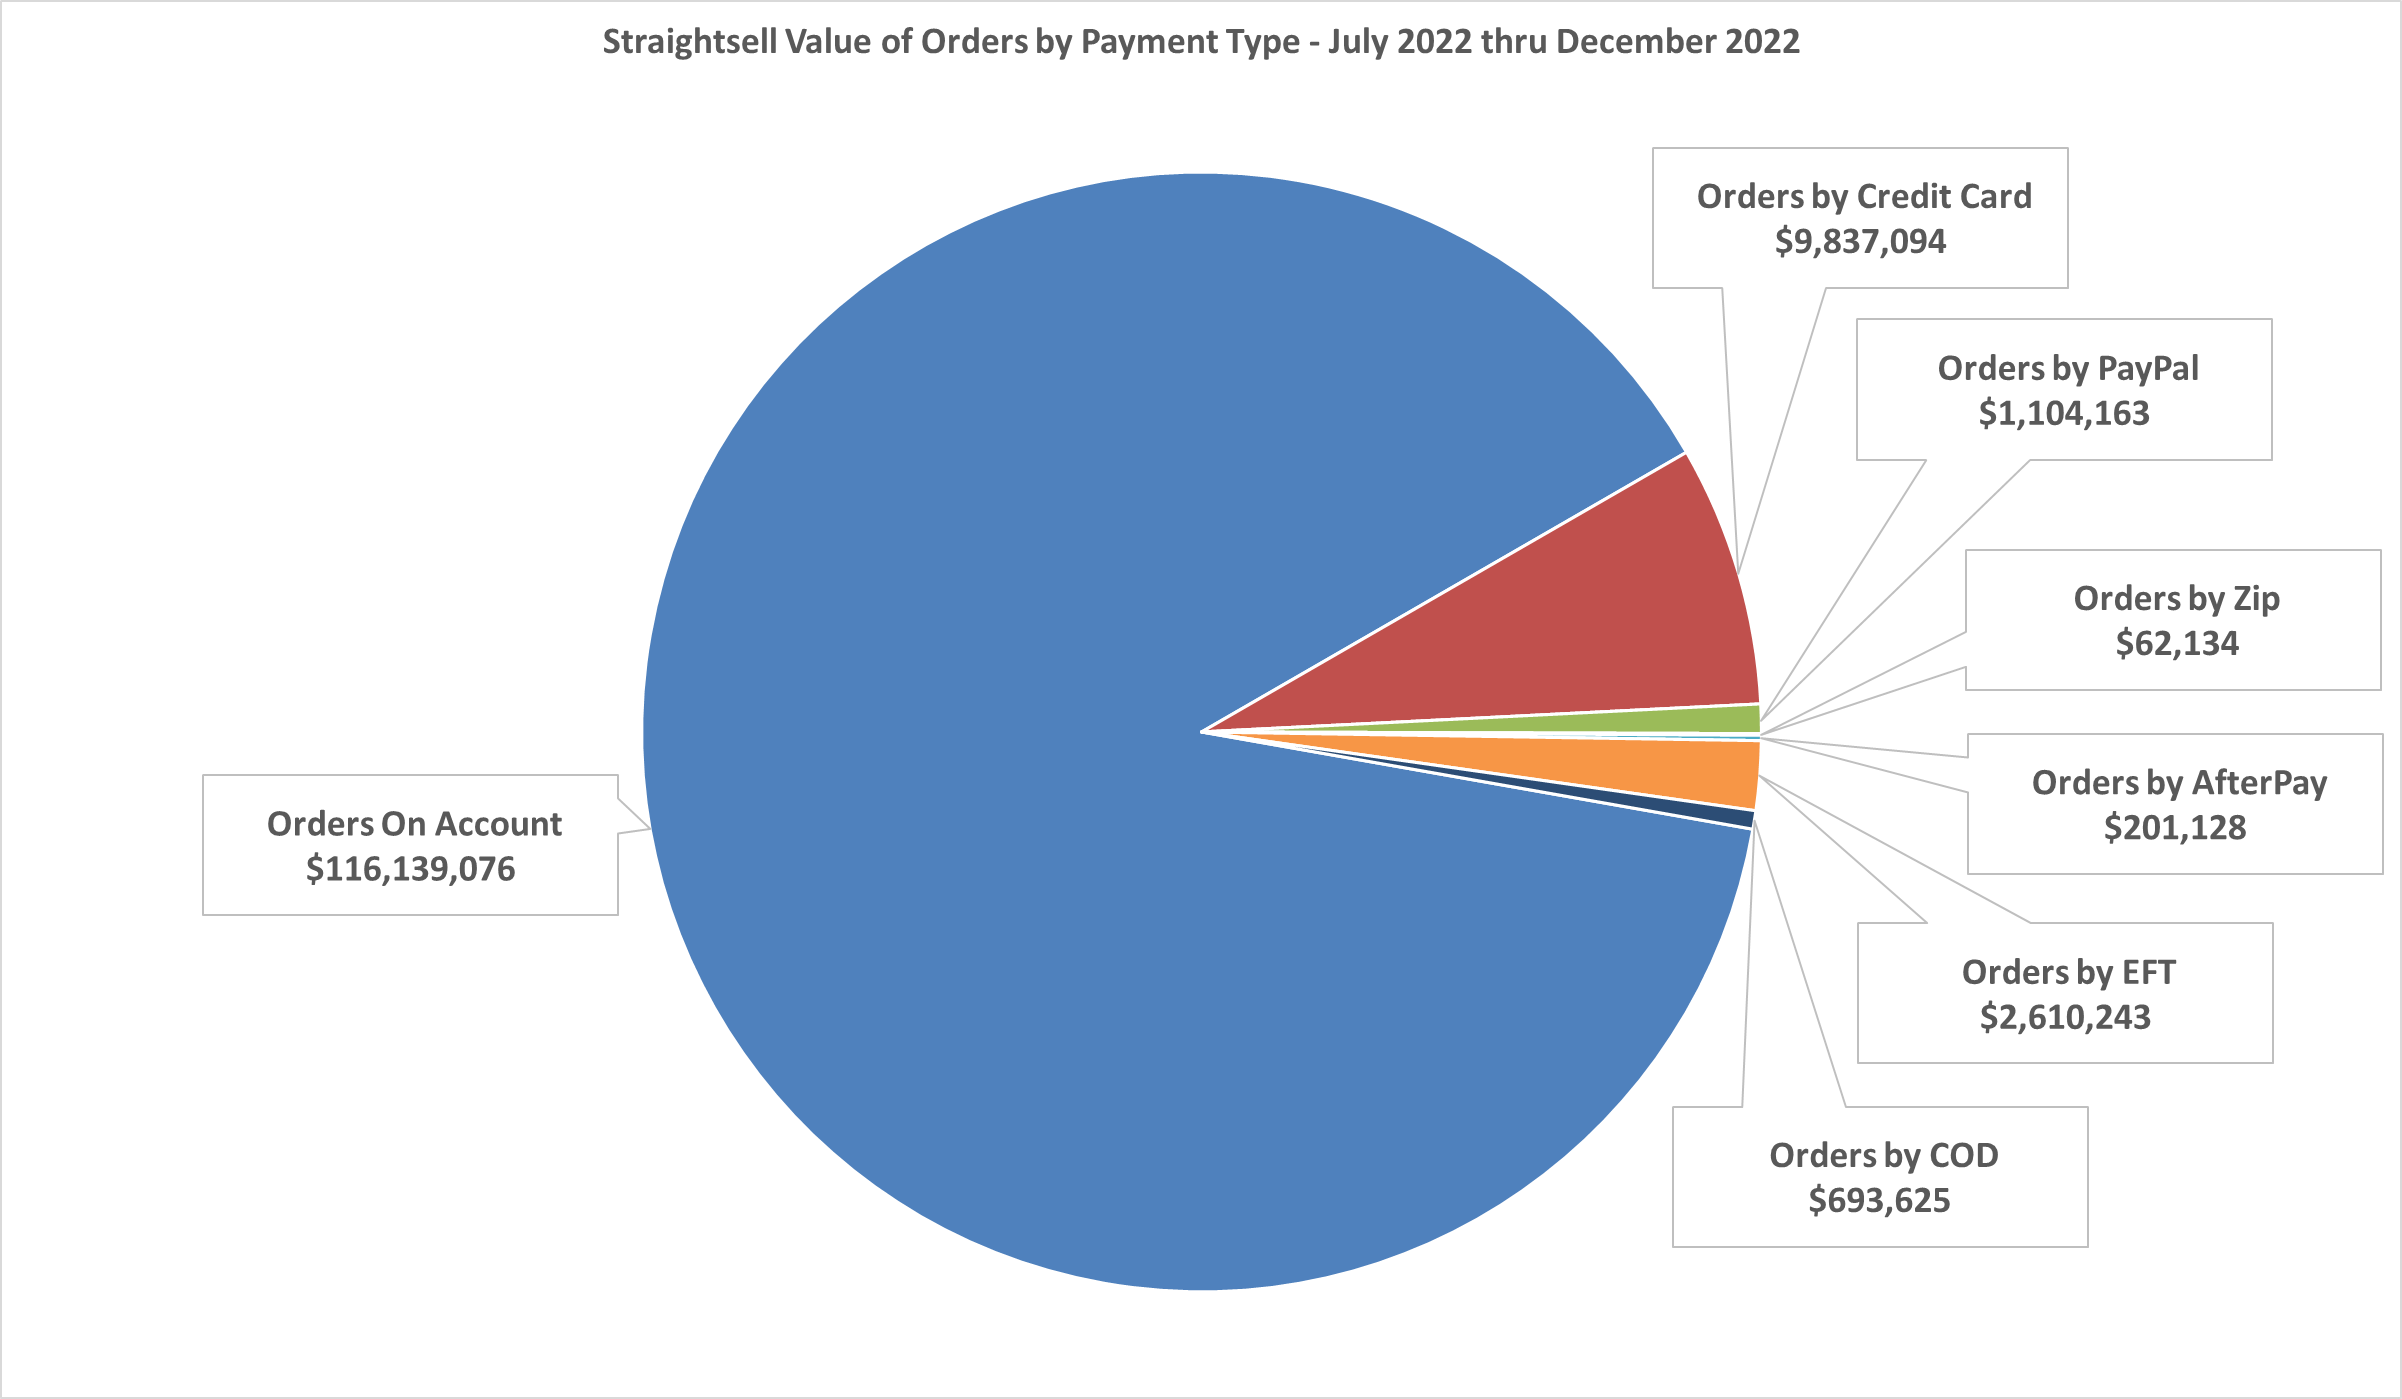 Straightsell Value of Orders by Payment Type - July 2022 thru December 2022